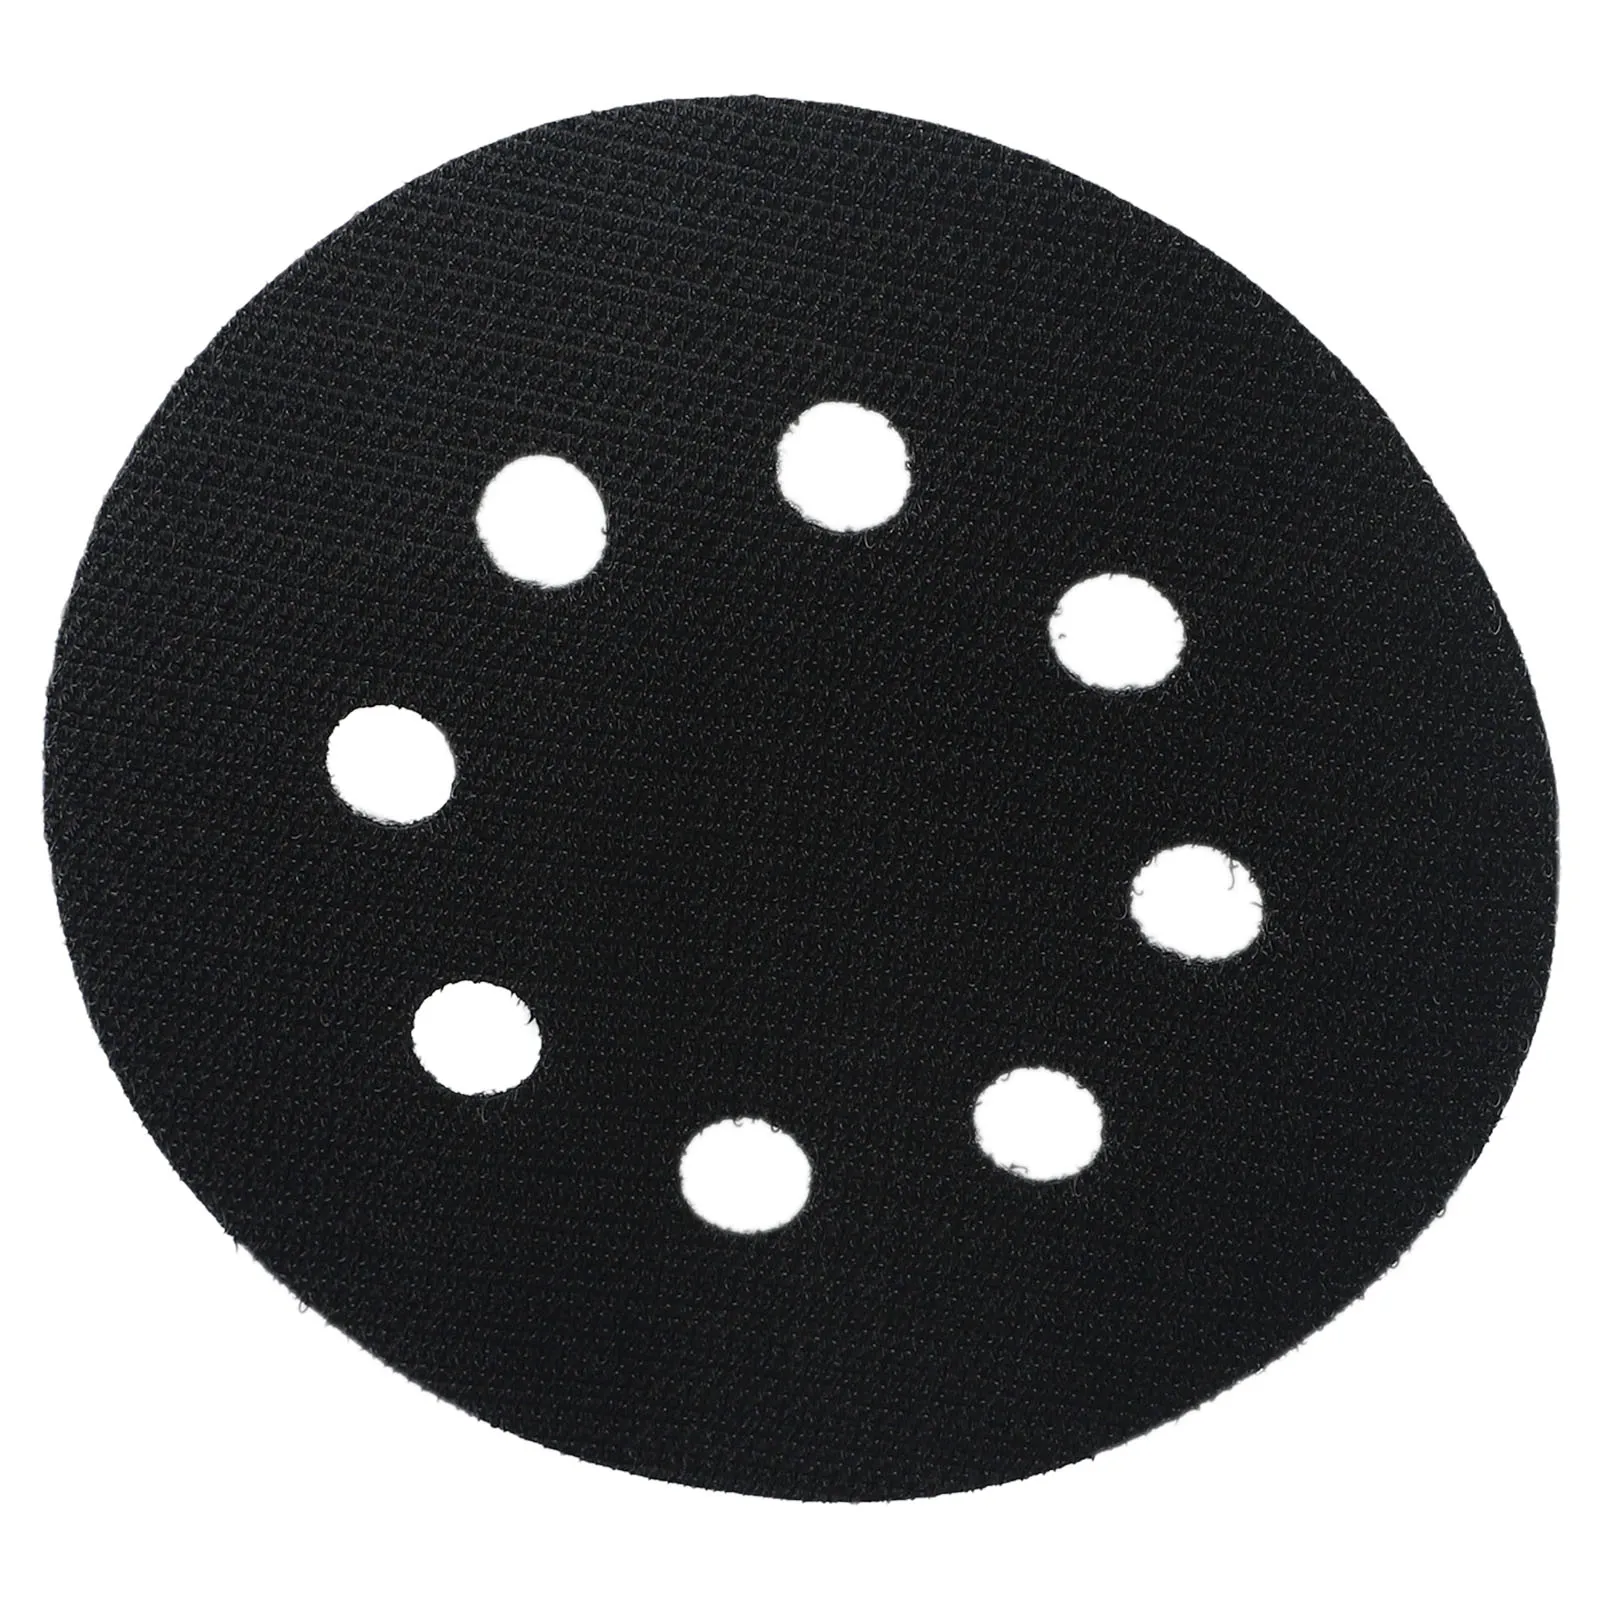 1PCS 5inch 8 Holes Flocking Protection Ultra-thin Interface Pad For Sanding Pad Sponge Power Tool Accessories Replacement